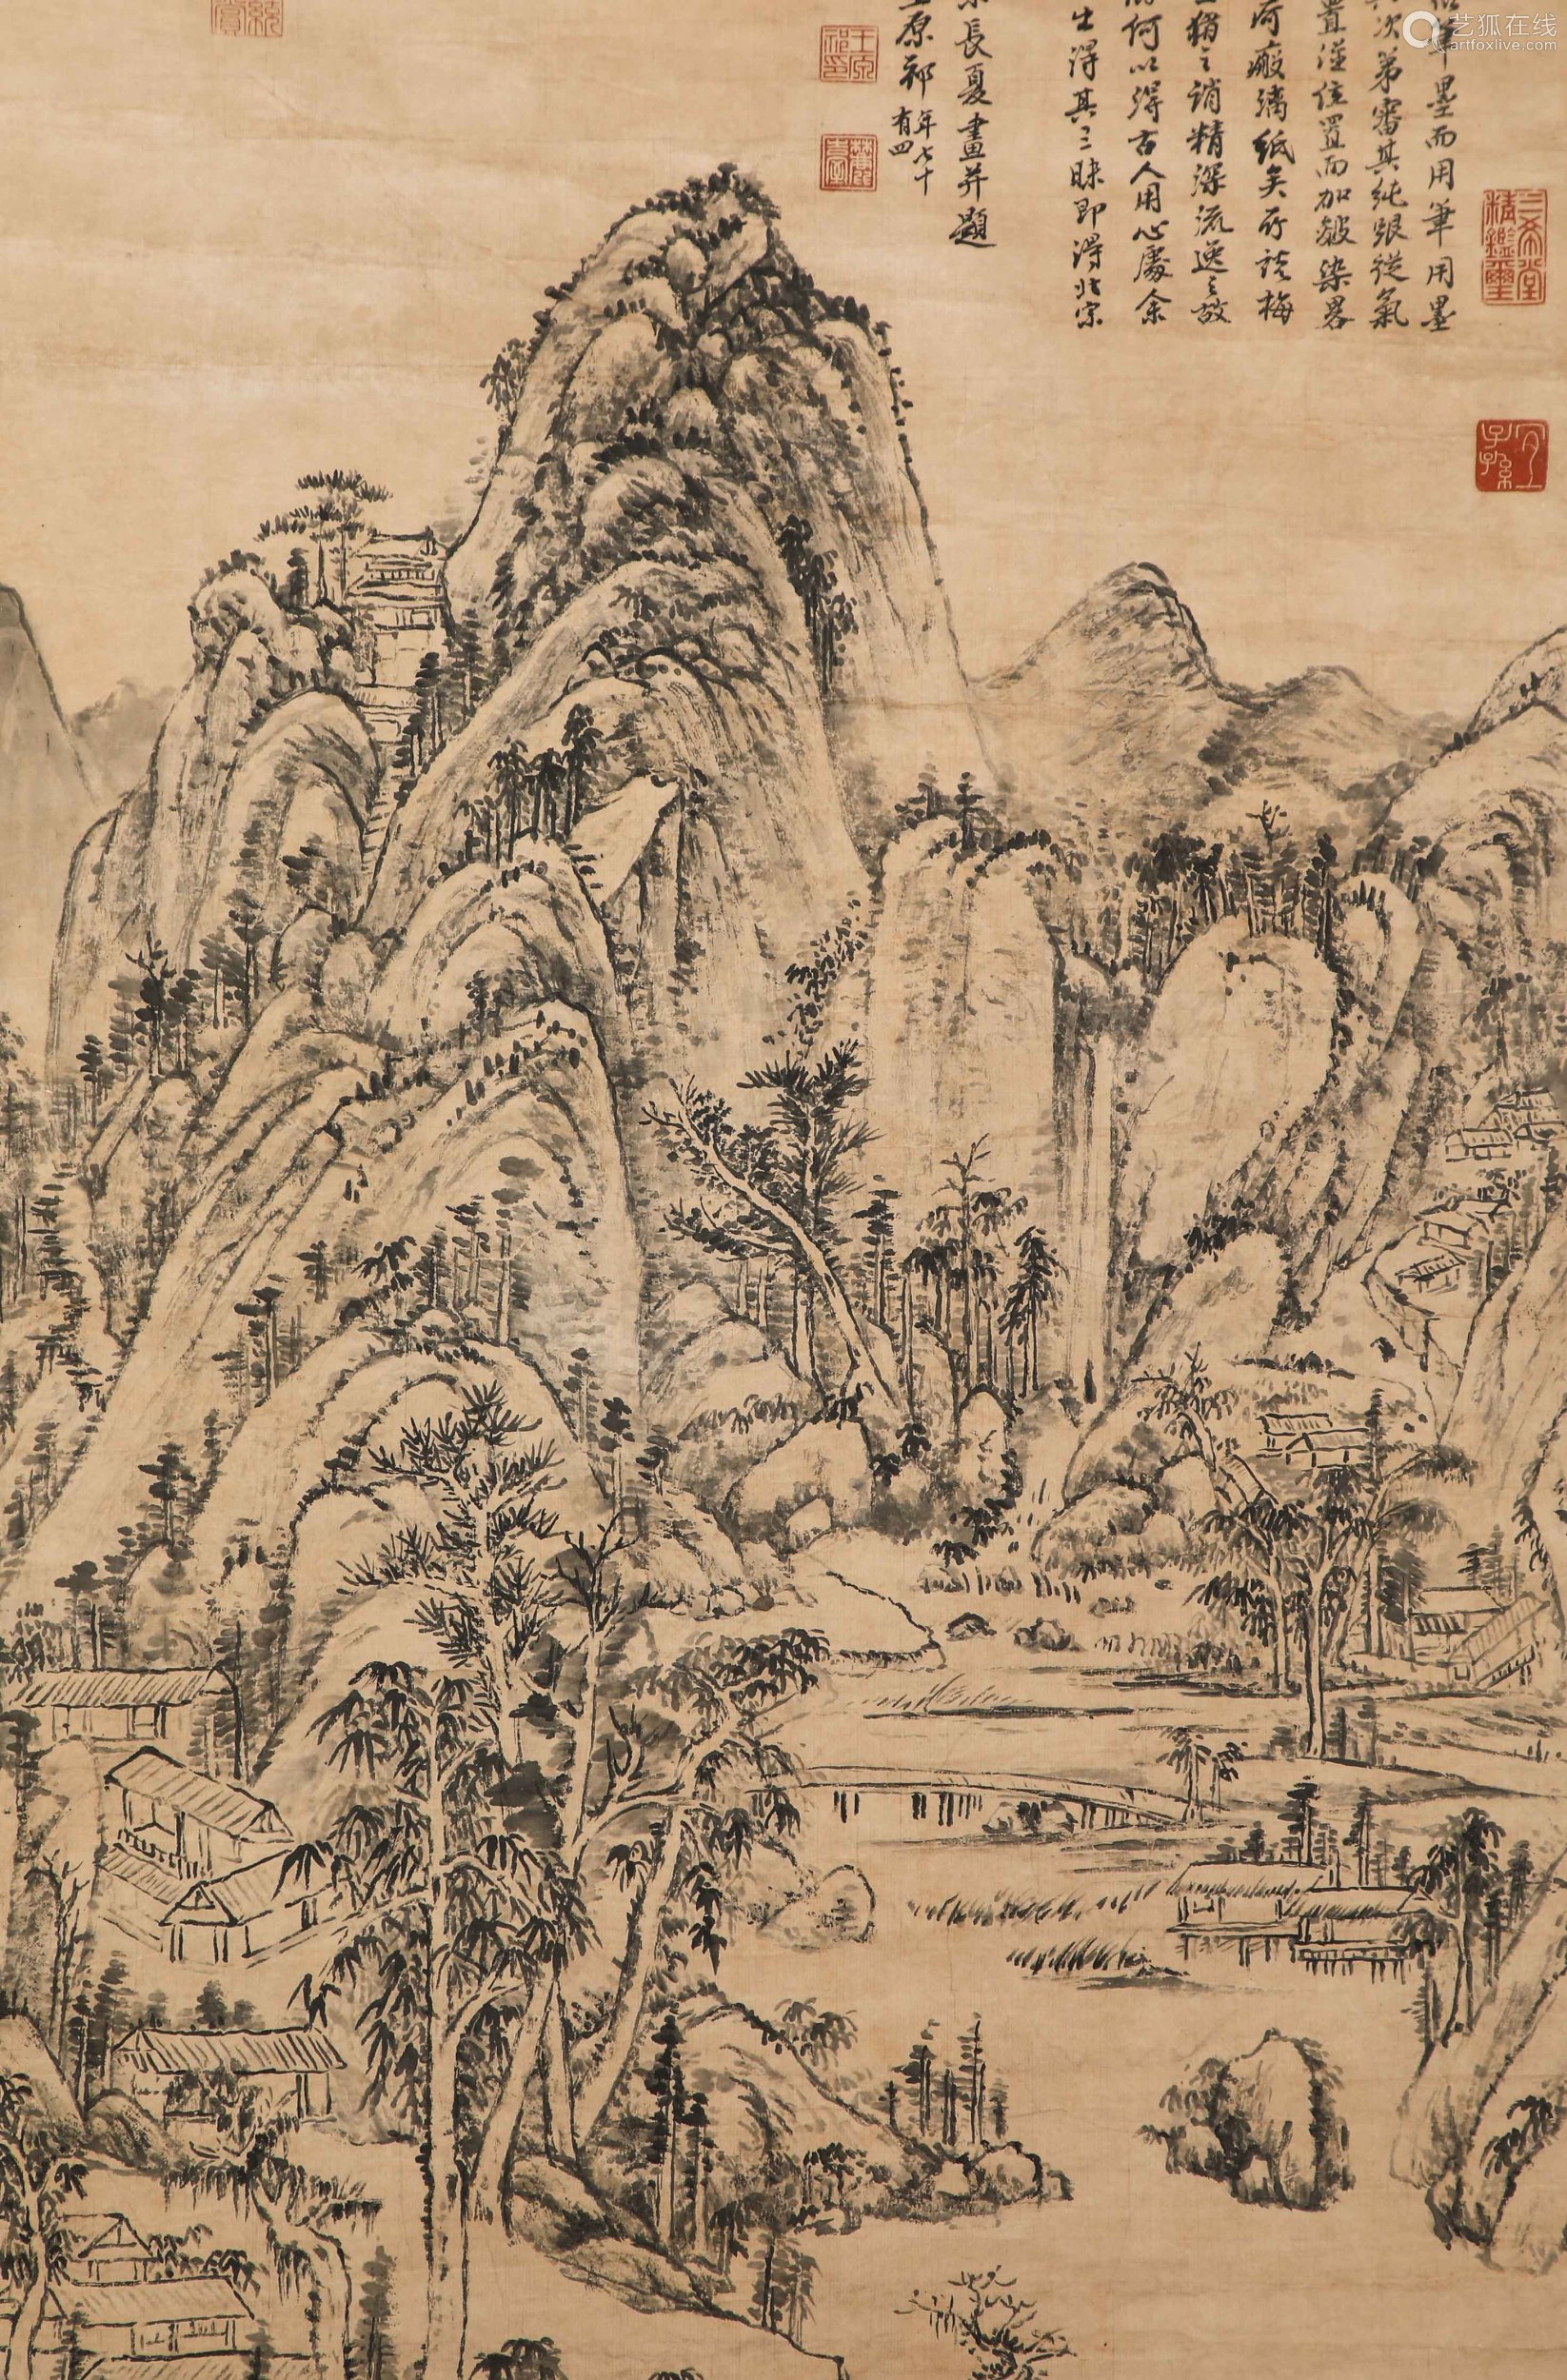 Chinese ink painting,
Wang Yuanqi's landscape paintings